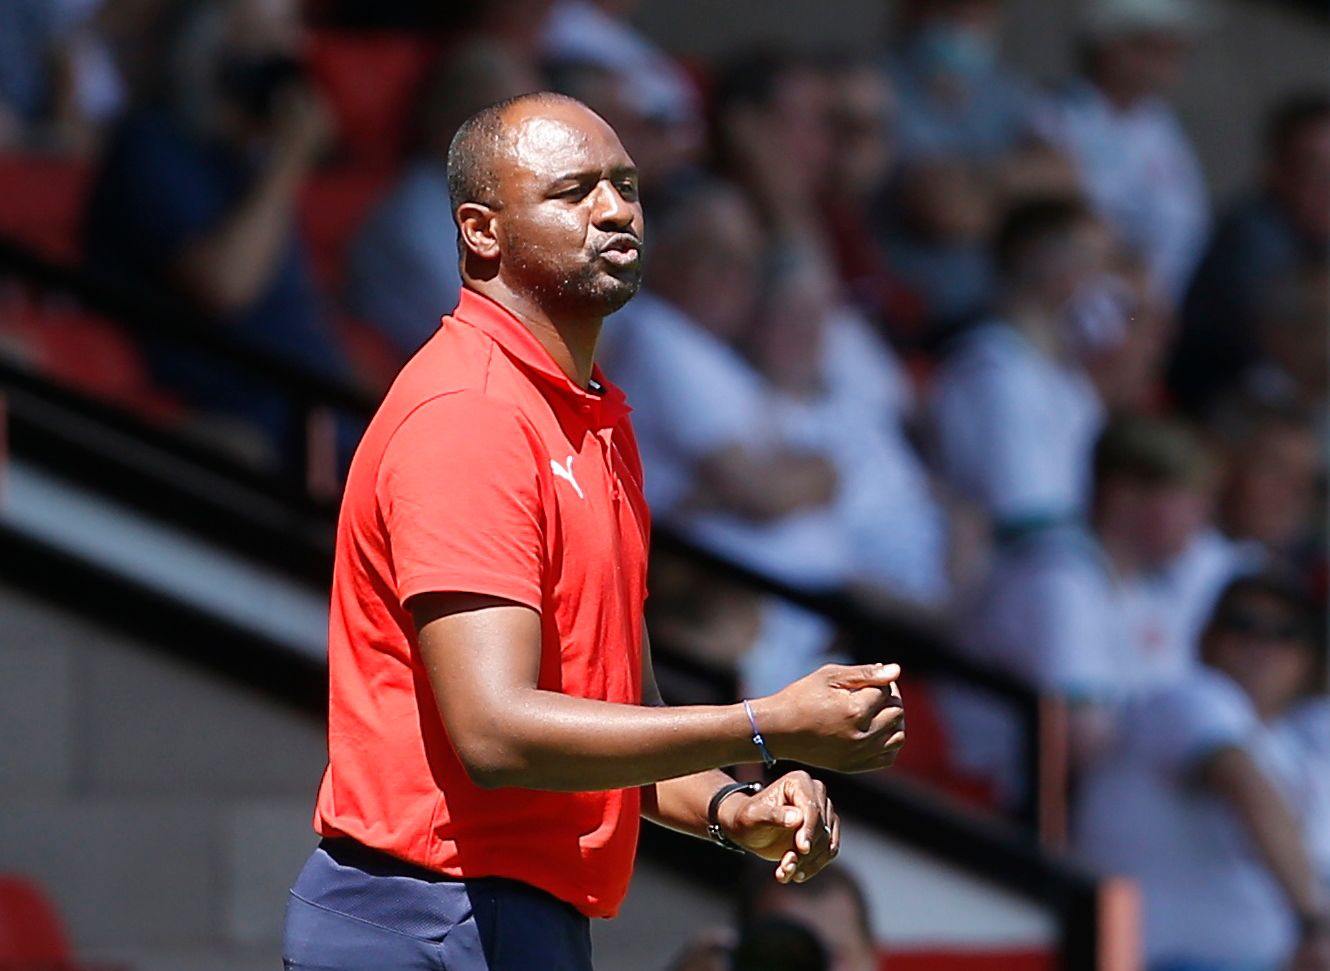 Soccer Football - Pre Season Friendly - Walsall v Crystal Palace - The Banks's Stadium, Walsall, Britain - July 17, 2021 Crystal Palace manager Patrick Vieira Action Images via Reuters/Craig Brough